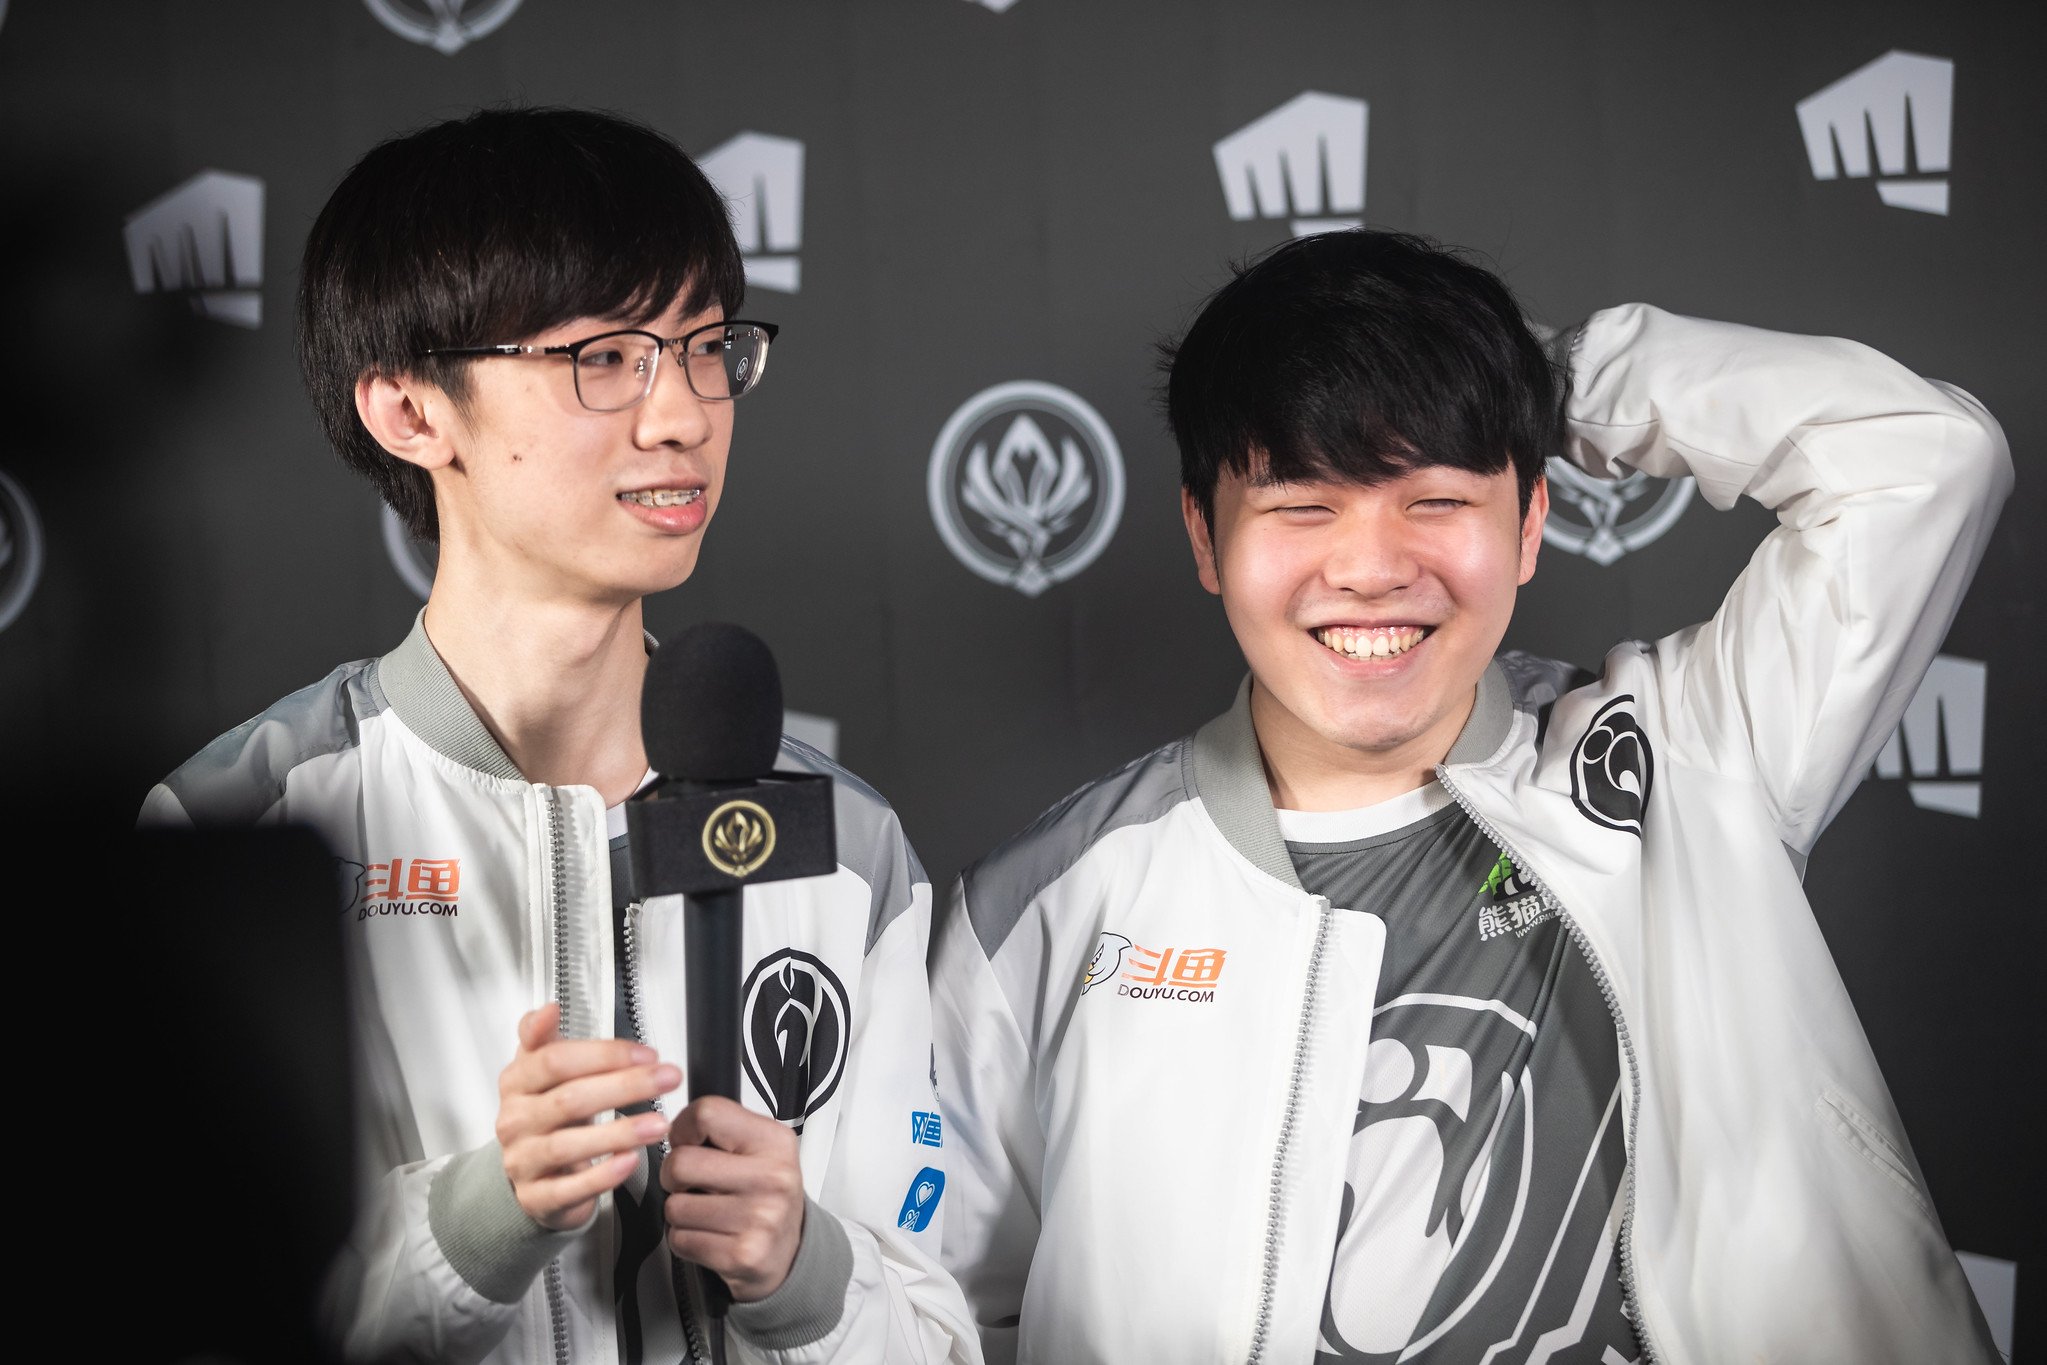 MSI 2019 Ticket Information – League of Legends